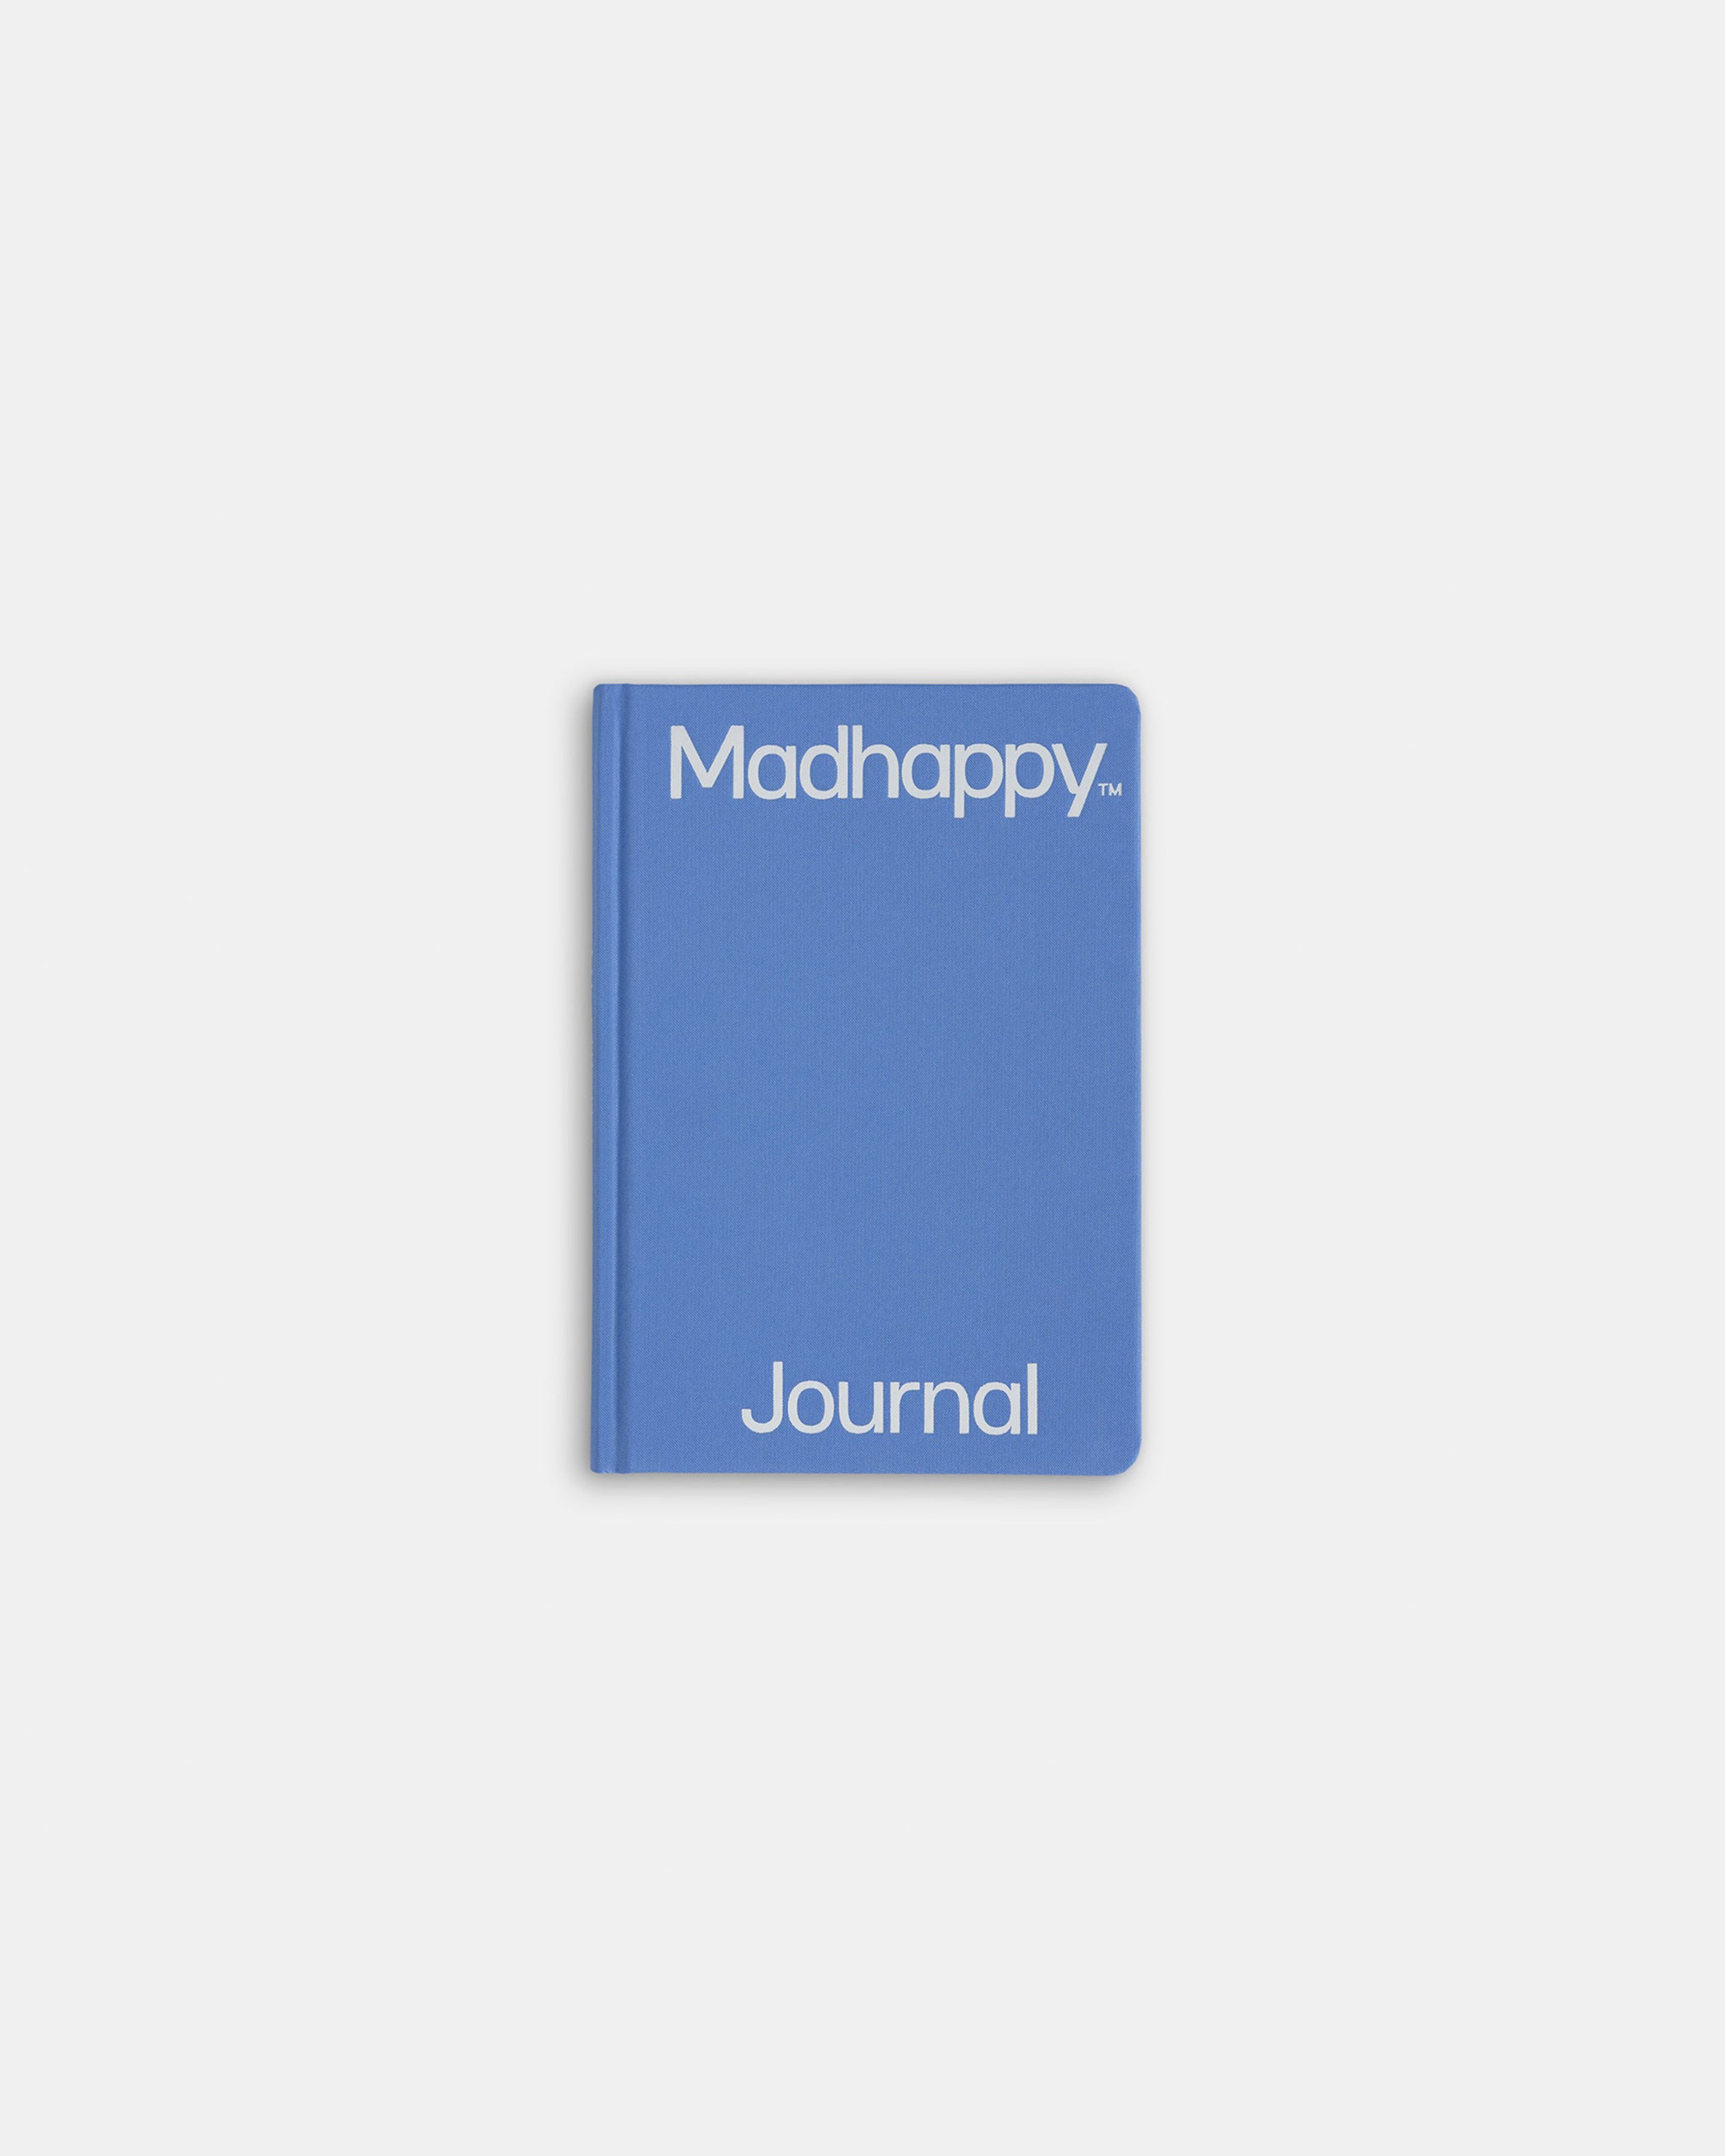 The Madhappy Journal